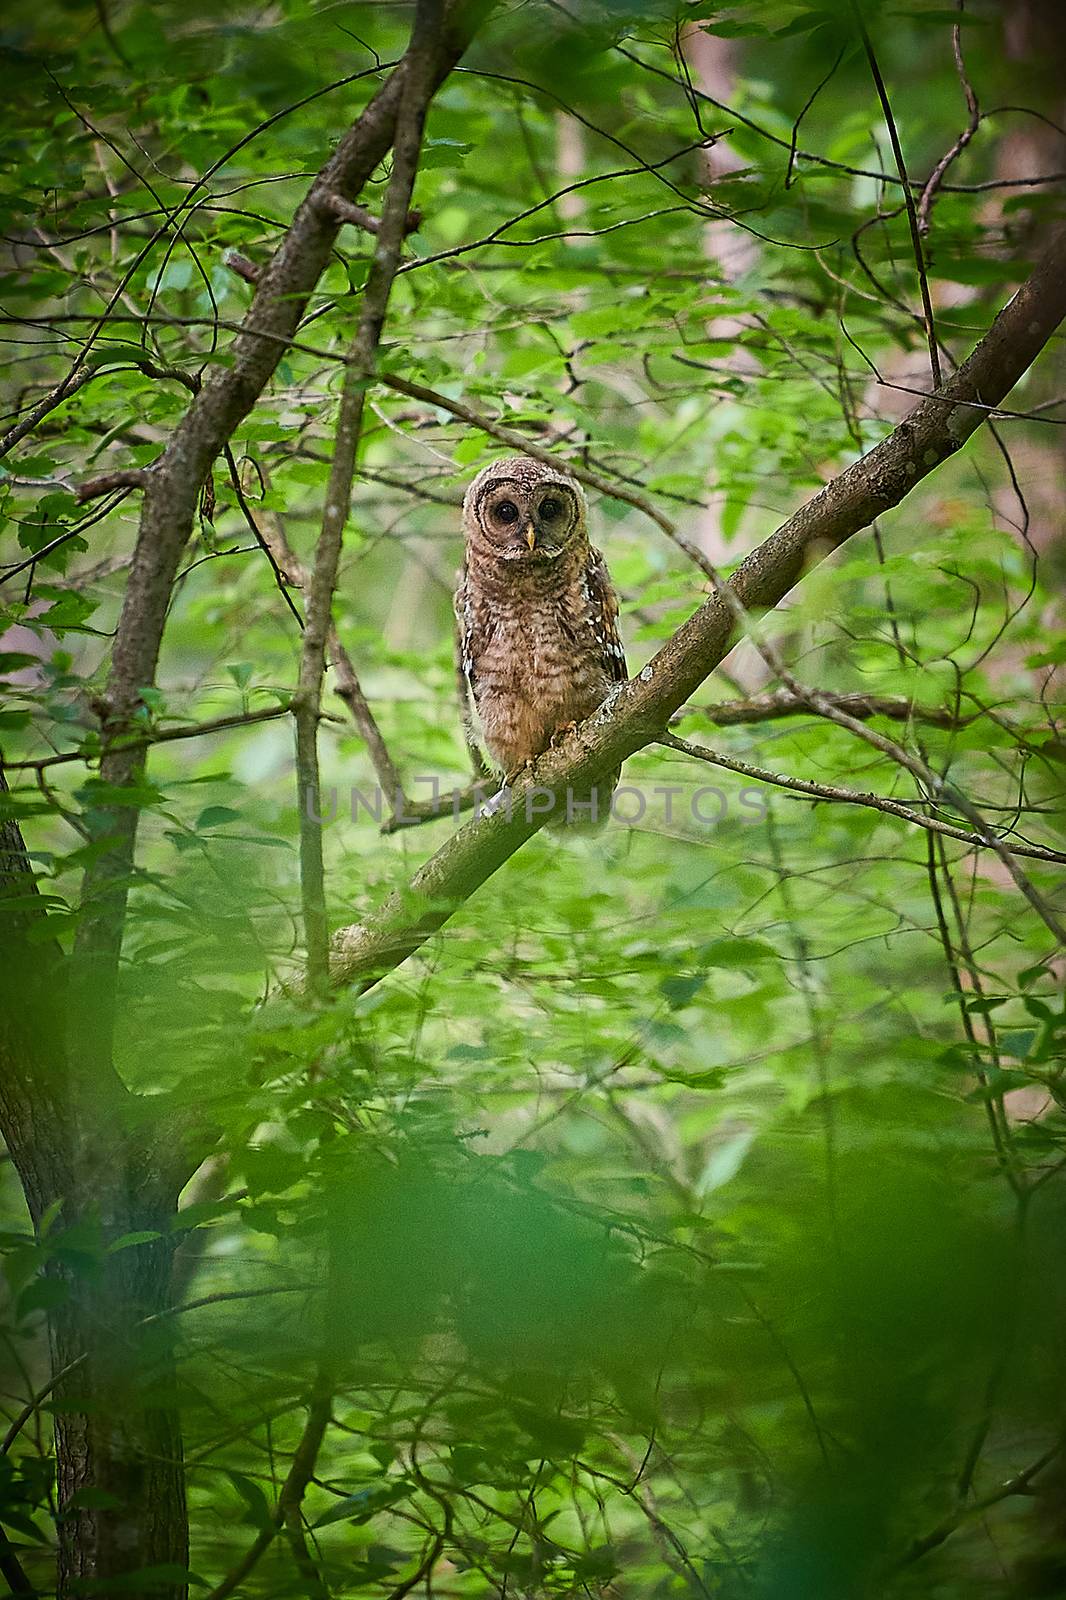 Adult Barred Owl sitting in a tree.